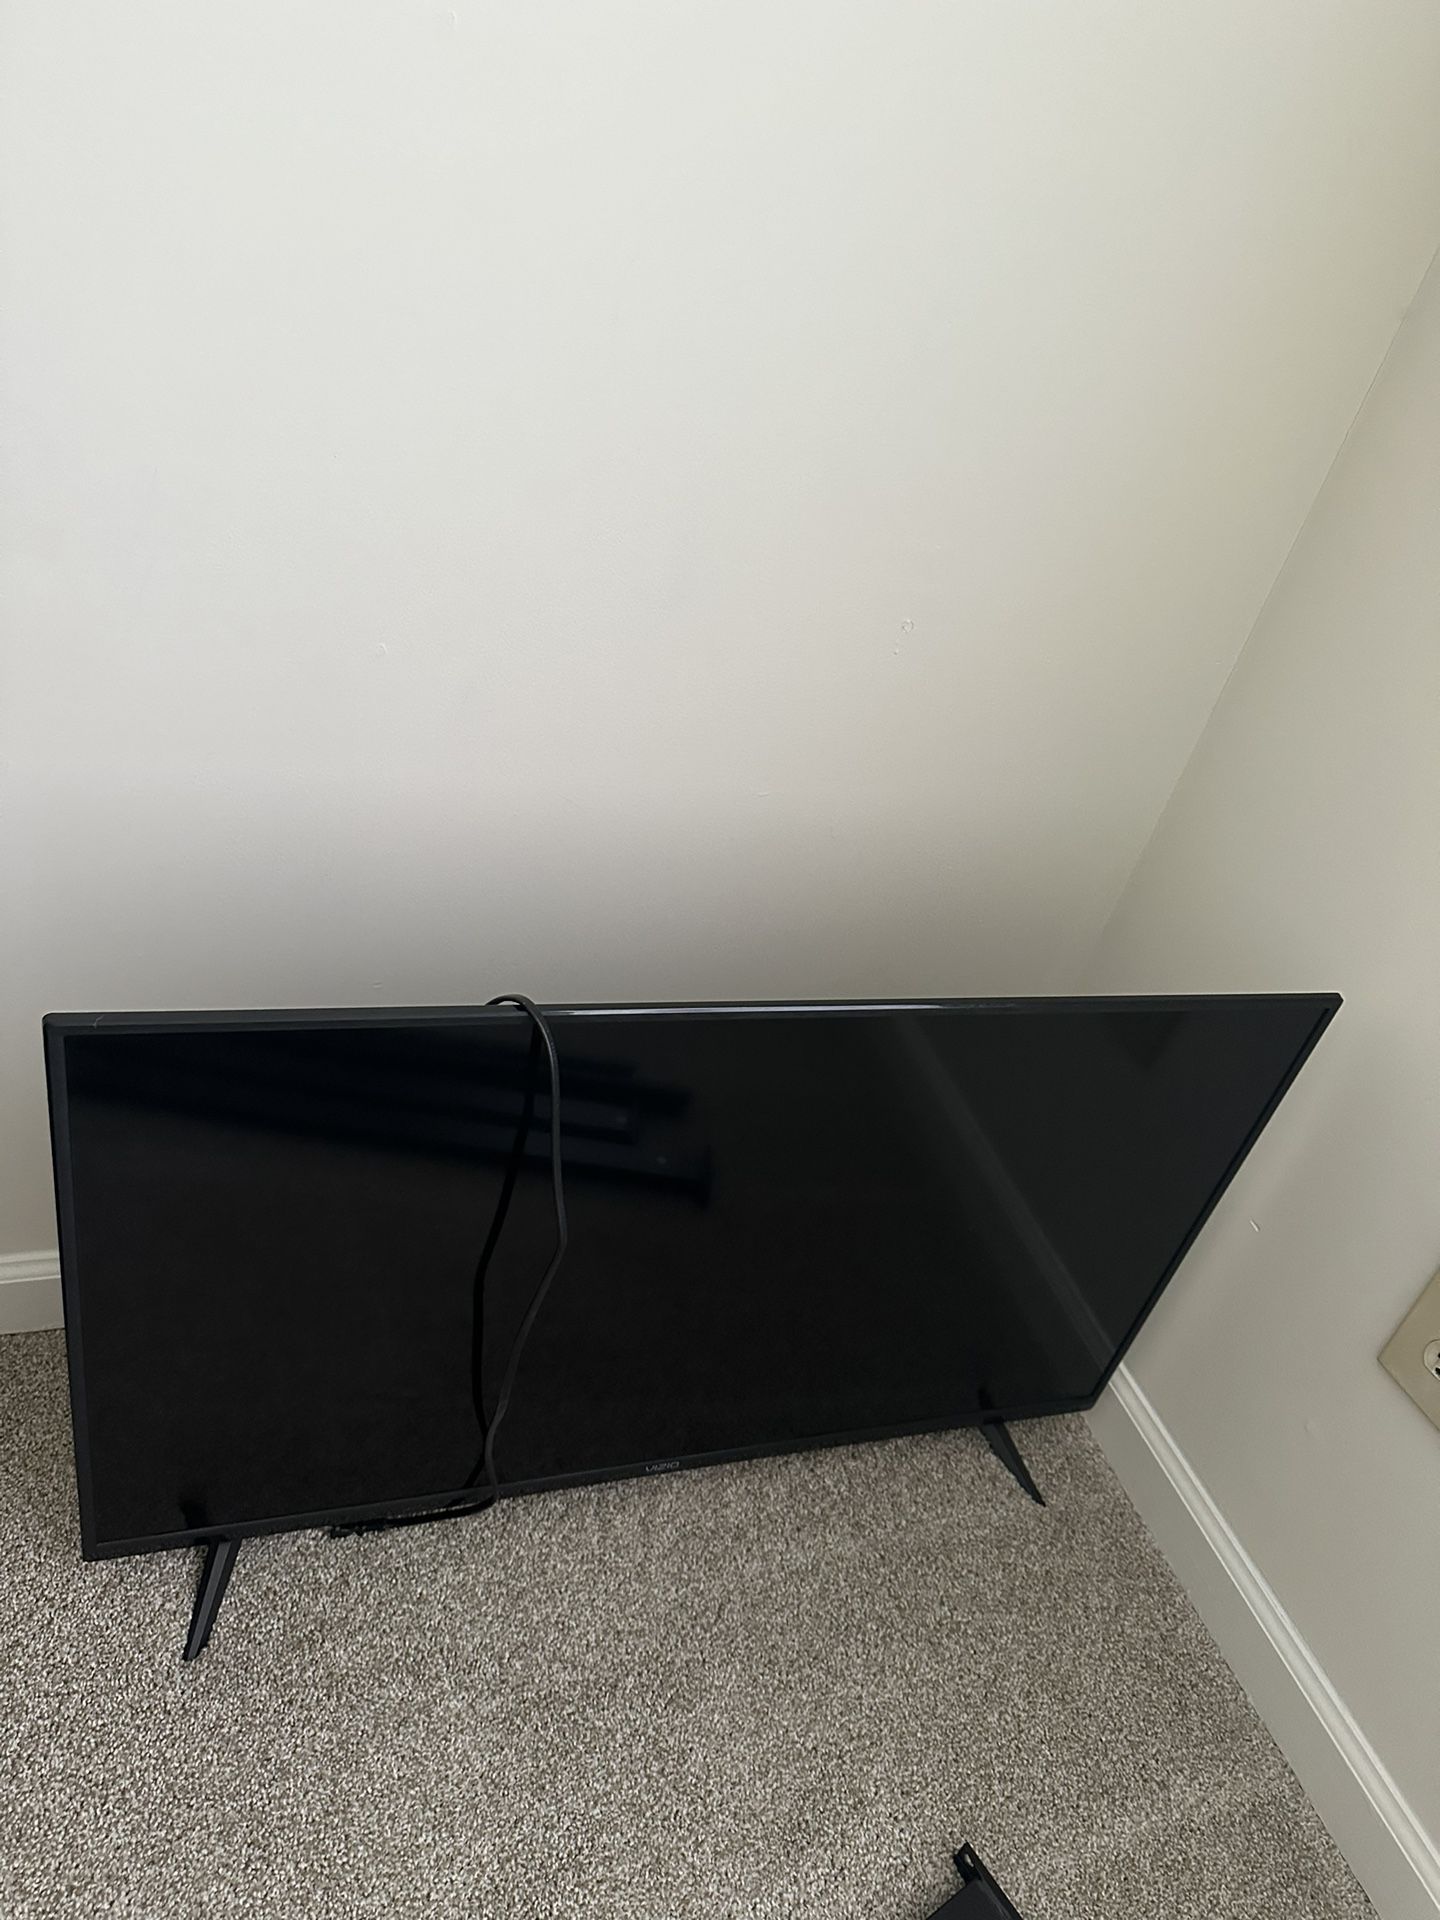 40 Inch Smart tv For Sale